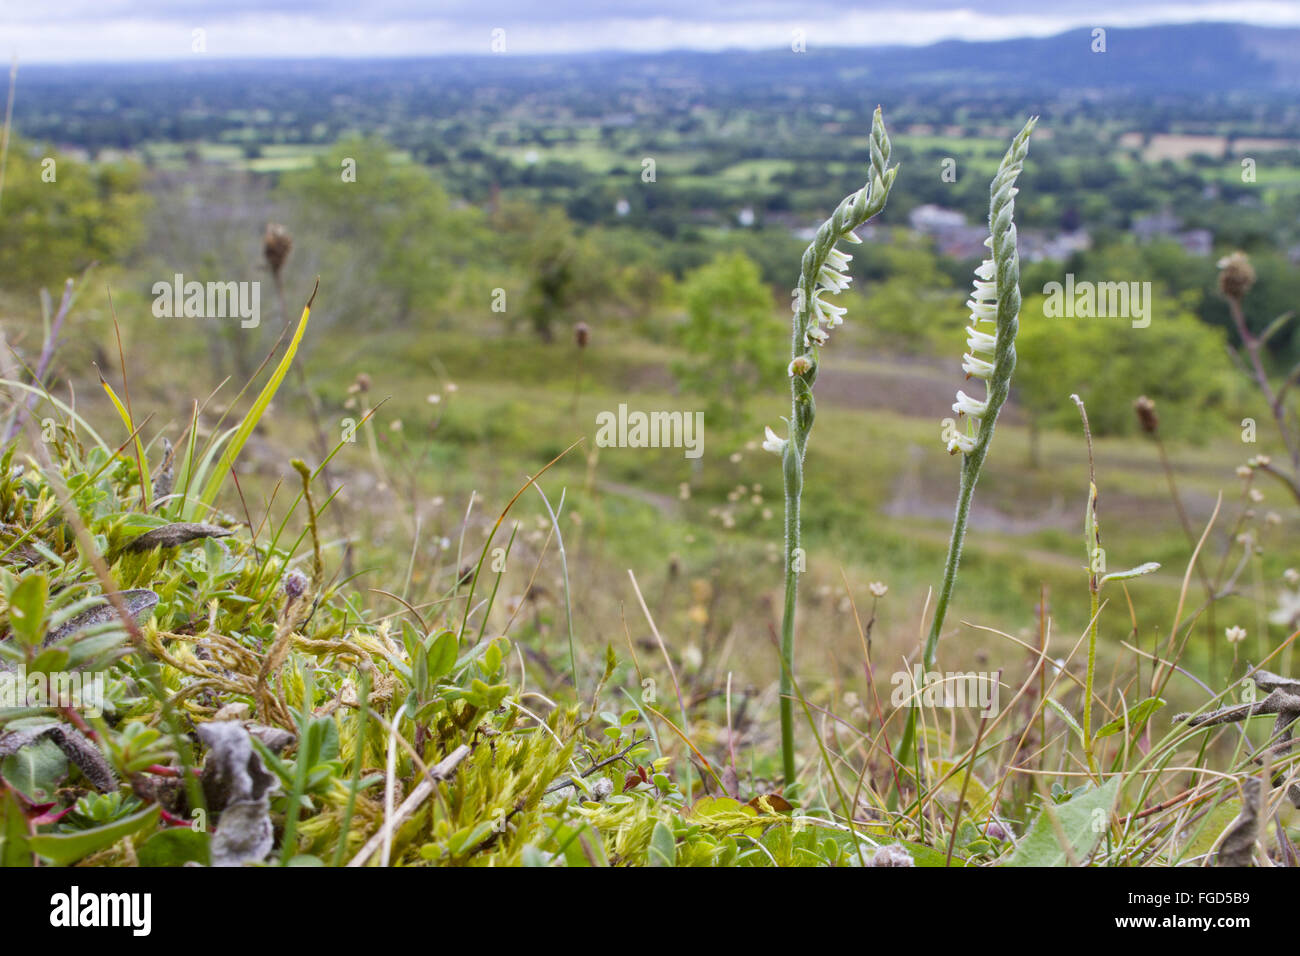 Autumn Lady's-tresses (Spiranthes spiralis) flowering, growing in limestone grassland habitat, Llanymynech Hill, Powys, Wales, August Stock Photo